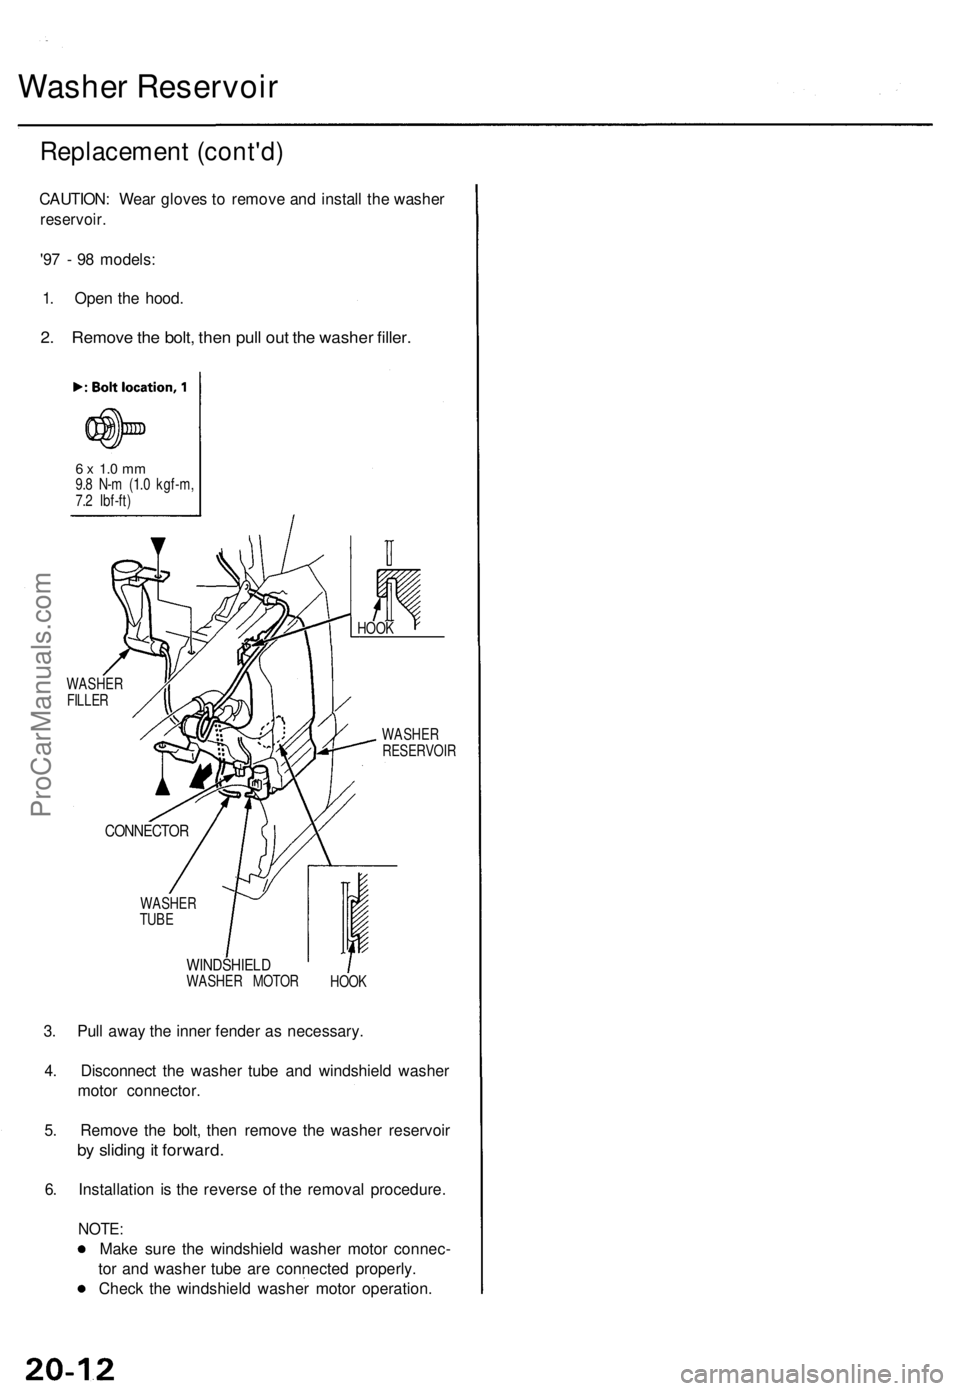 ACURA TL 1995  Service Repair Manual 
Washer Reservoir

Replacement (cont'd)

CAUTION: Wear gloves to remove and install the washer

reservoir.

'97 - 98 models:

1. Open the hood.

2. Remove the bolt, then pull out the washer fi